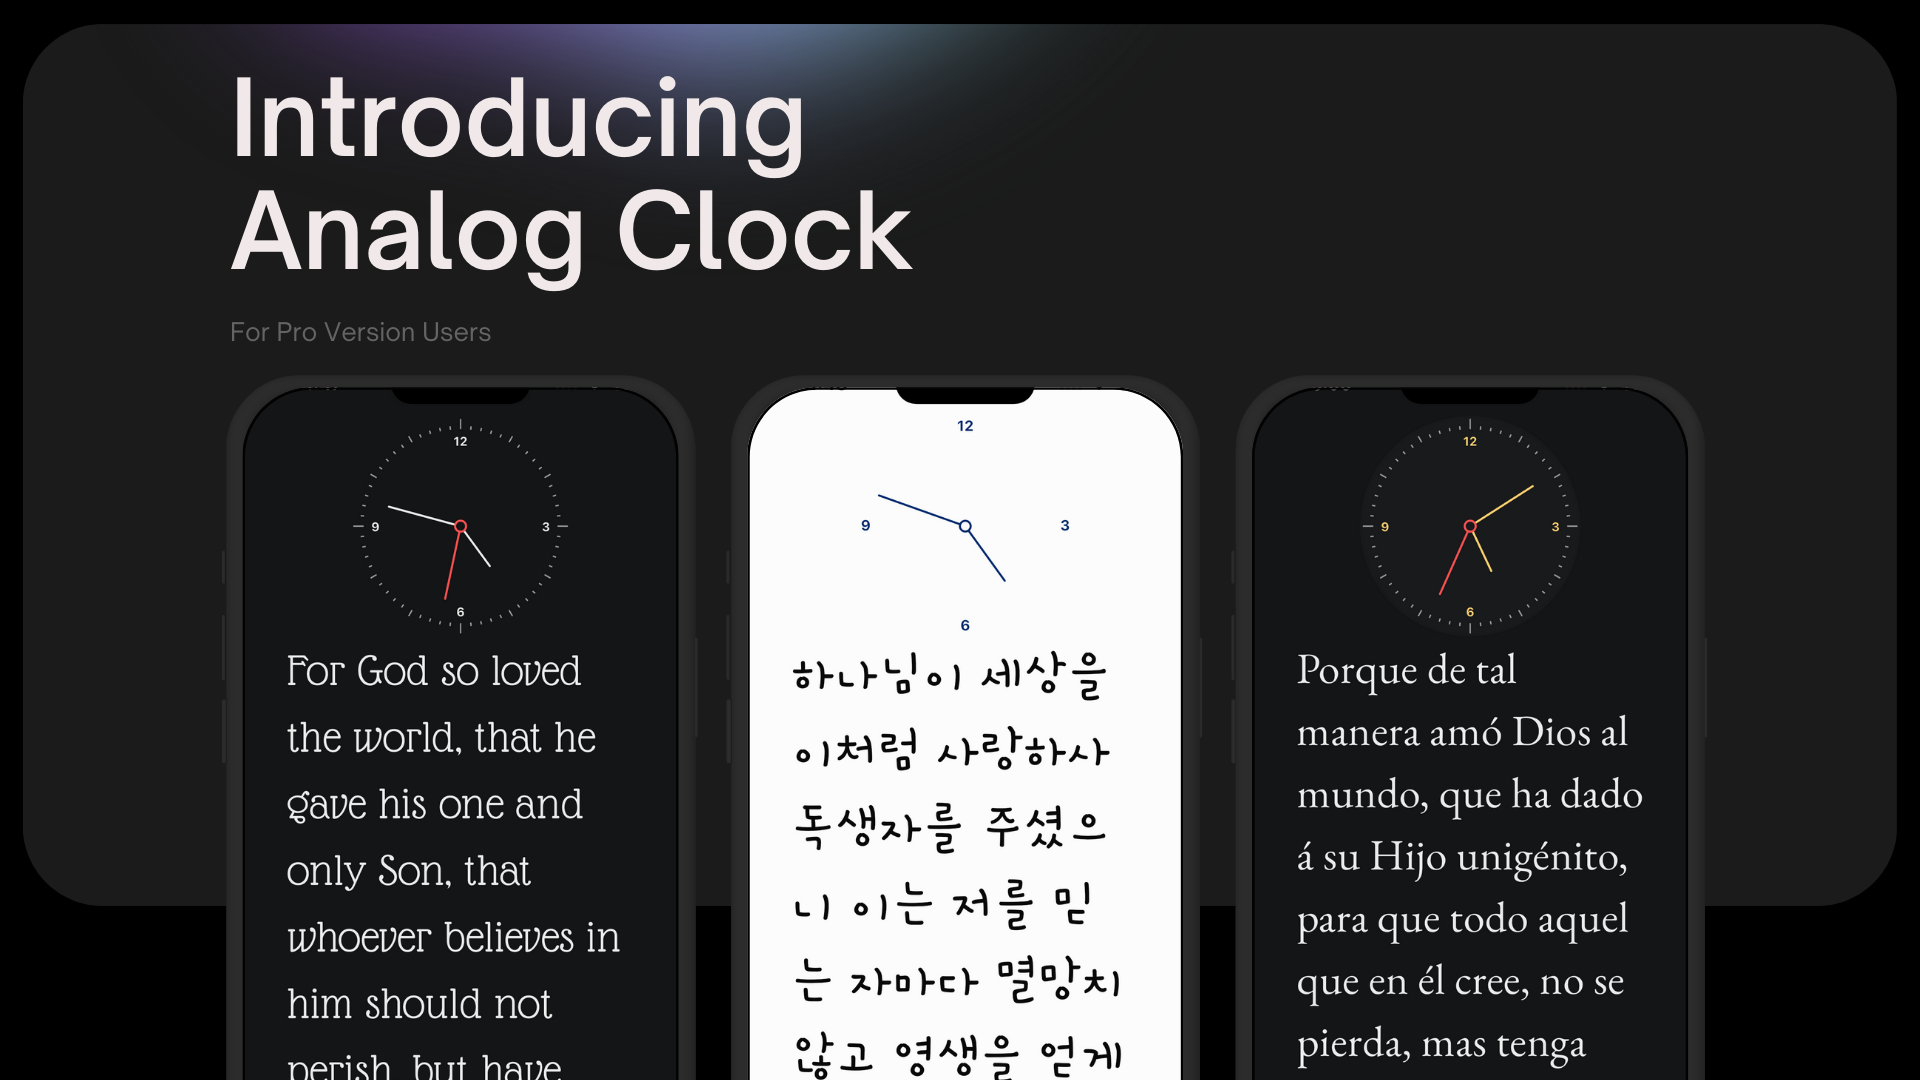 Exciting Update: Bible Clock Launches New Version (0.9.10) with Analog Clock and Spanish language